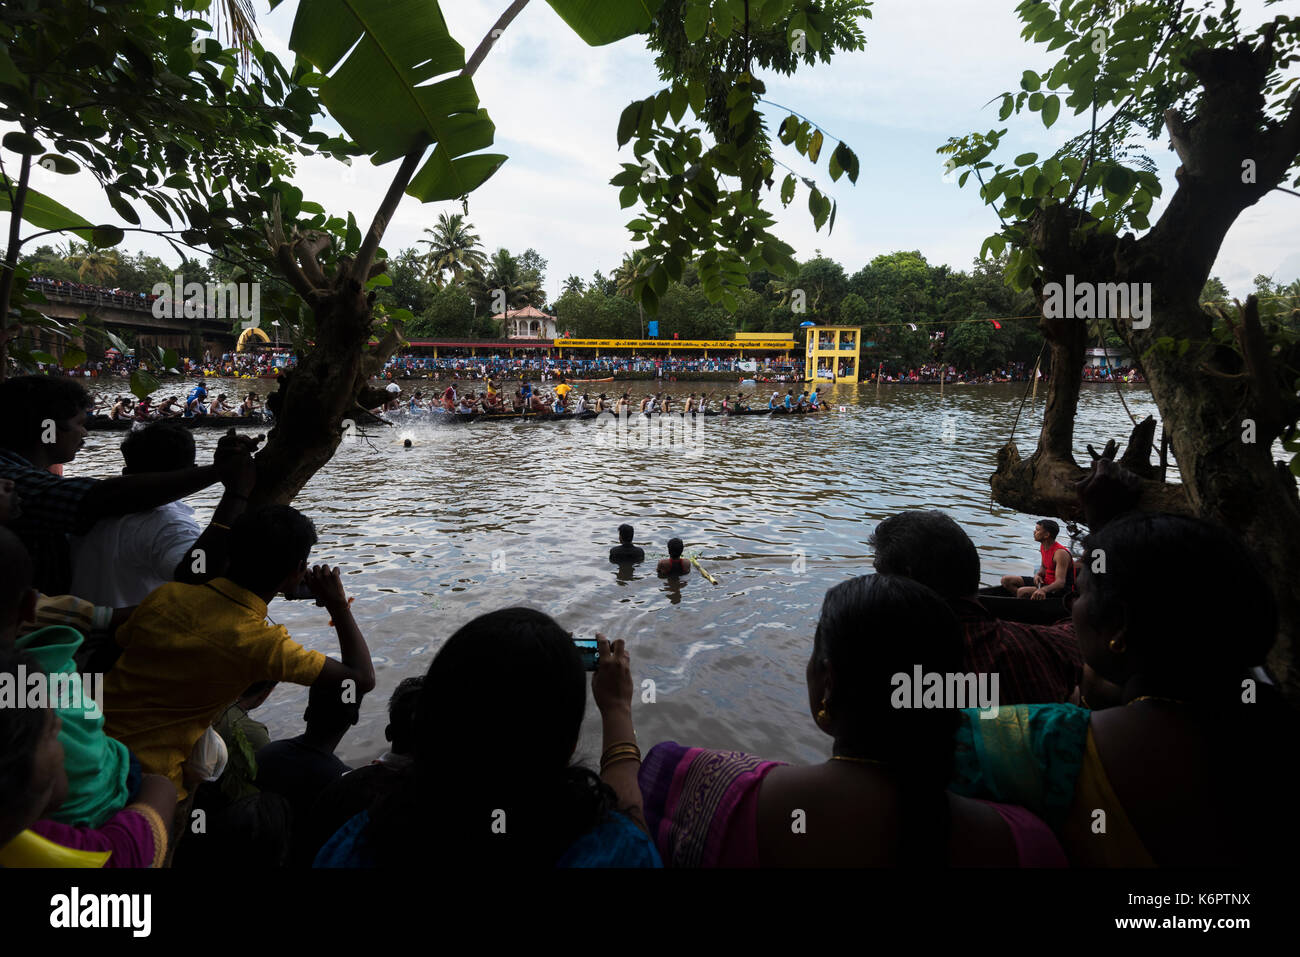 Villagers watching the race from the banks of the river. Stock Photo